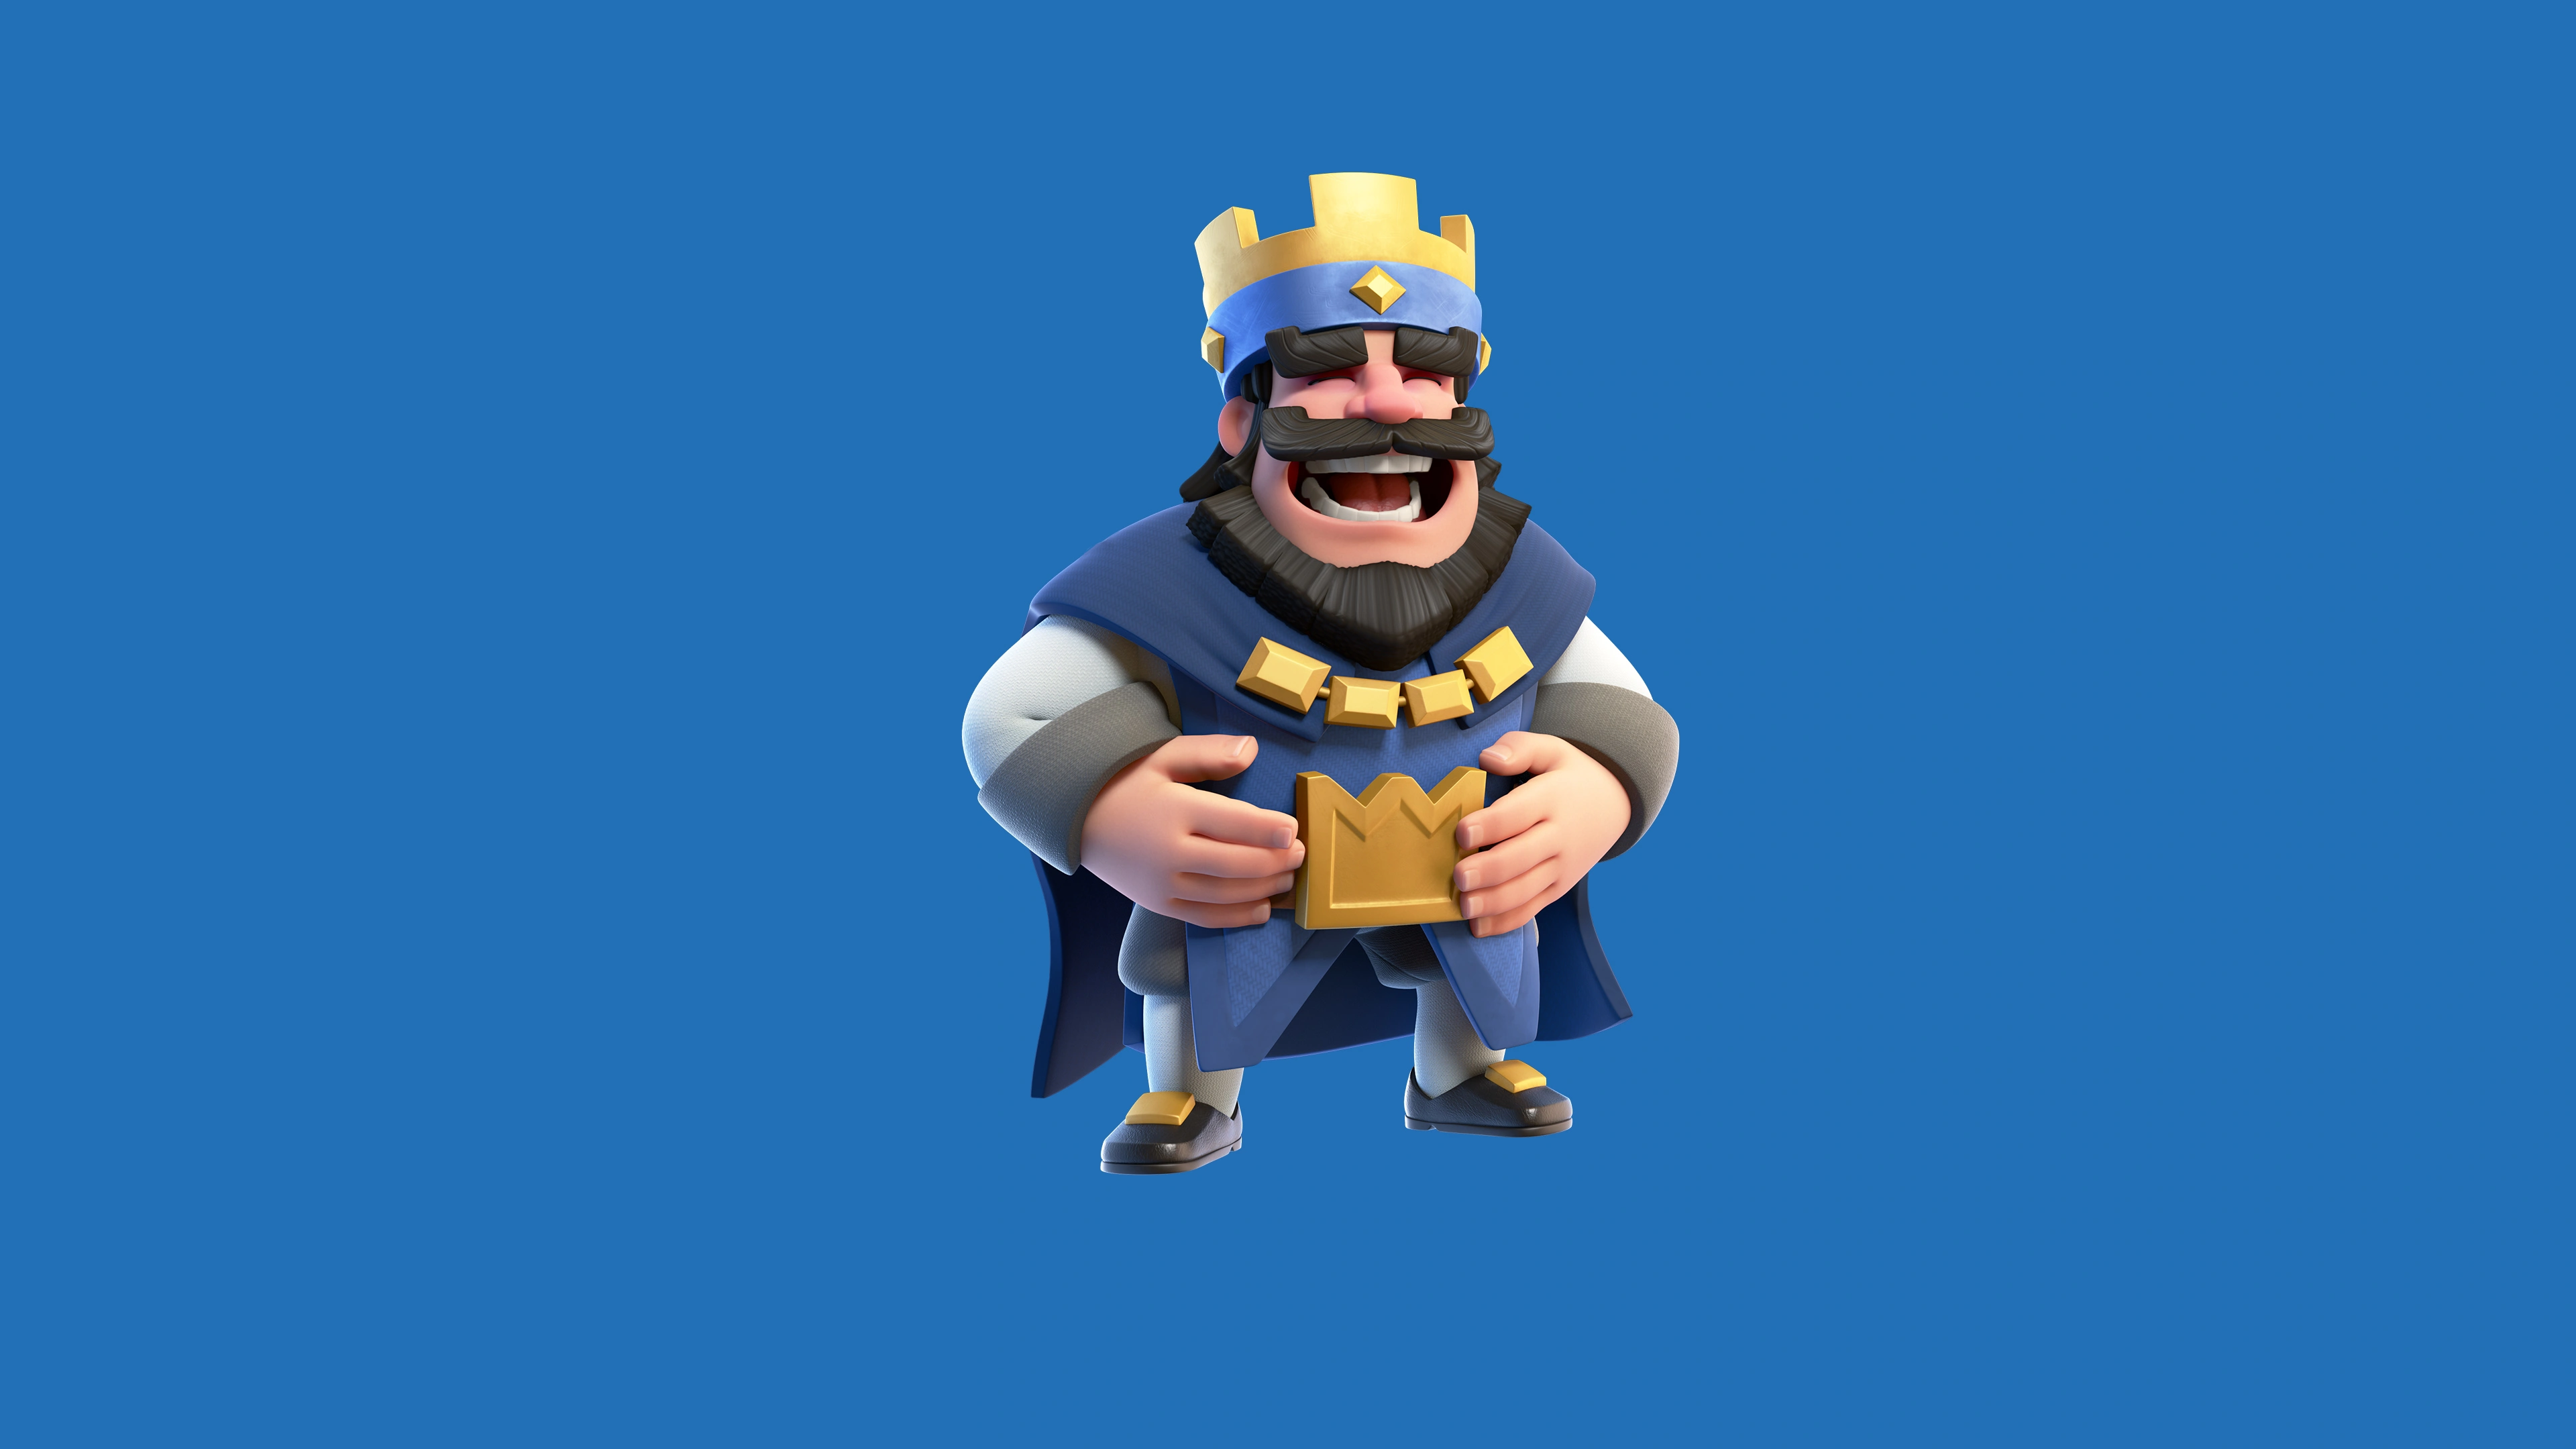 clash royale blue king 1536009009 - Clash Royale Blue King - supercell wallpapers, games wallpapers, clash royale wallpapers, 2016 games wallpapers